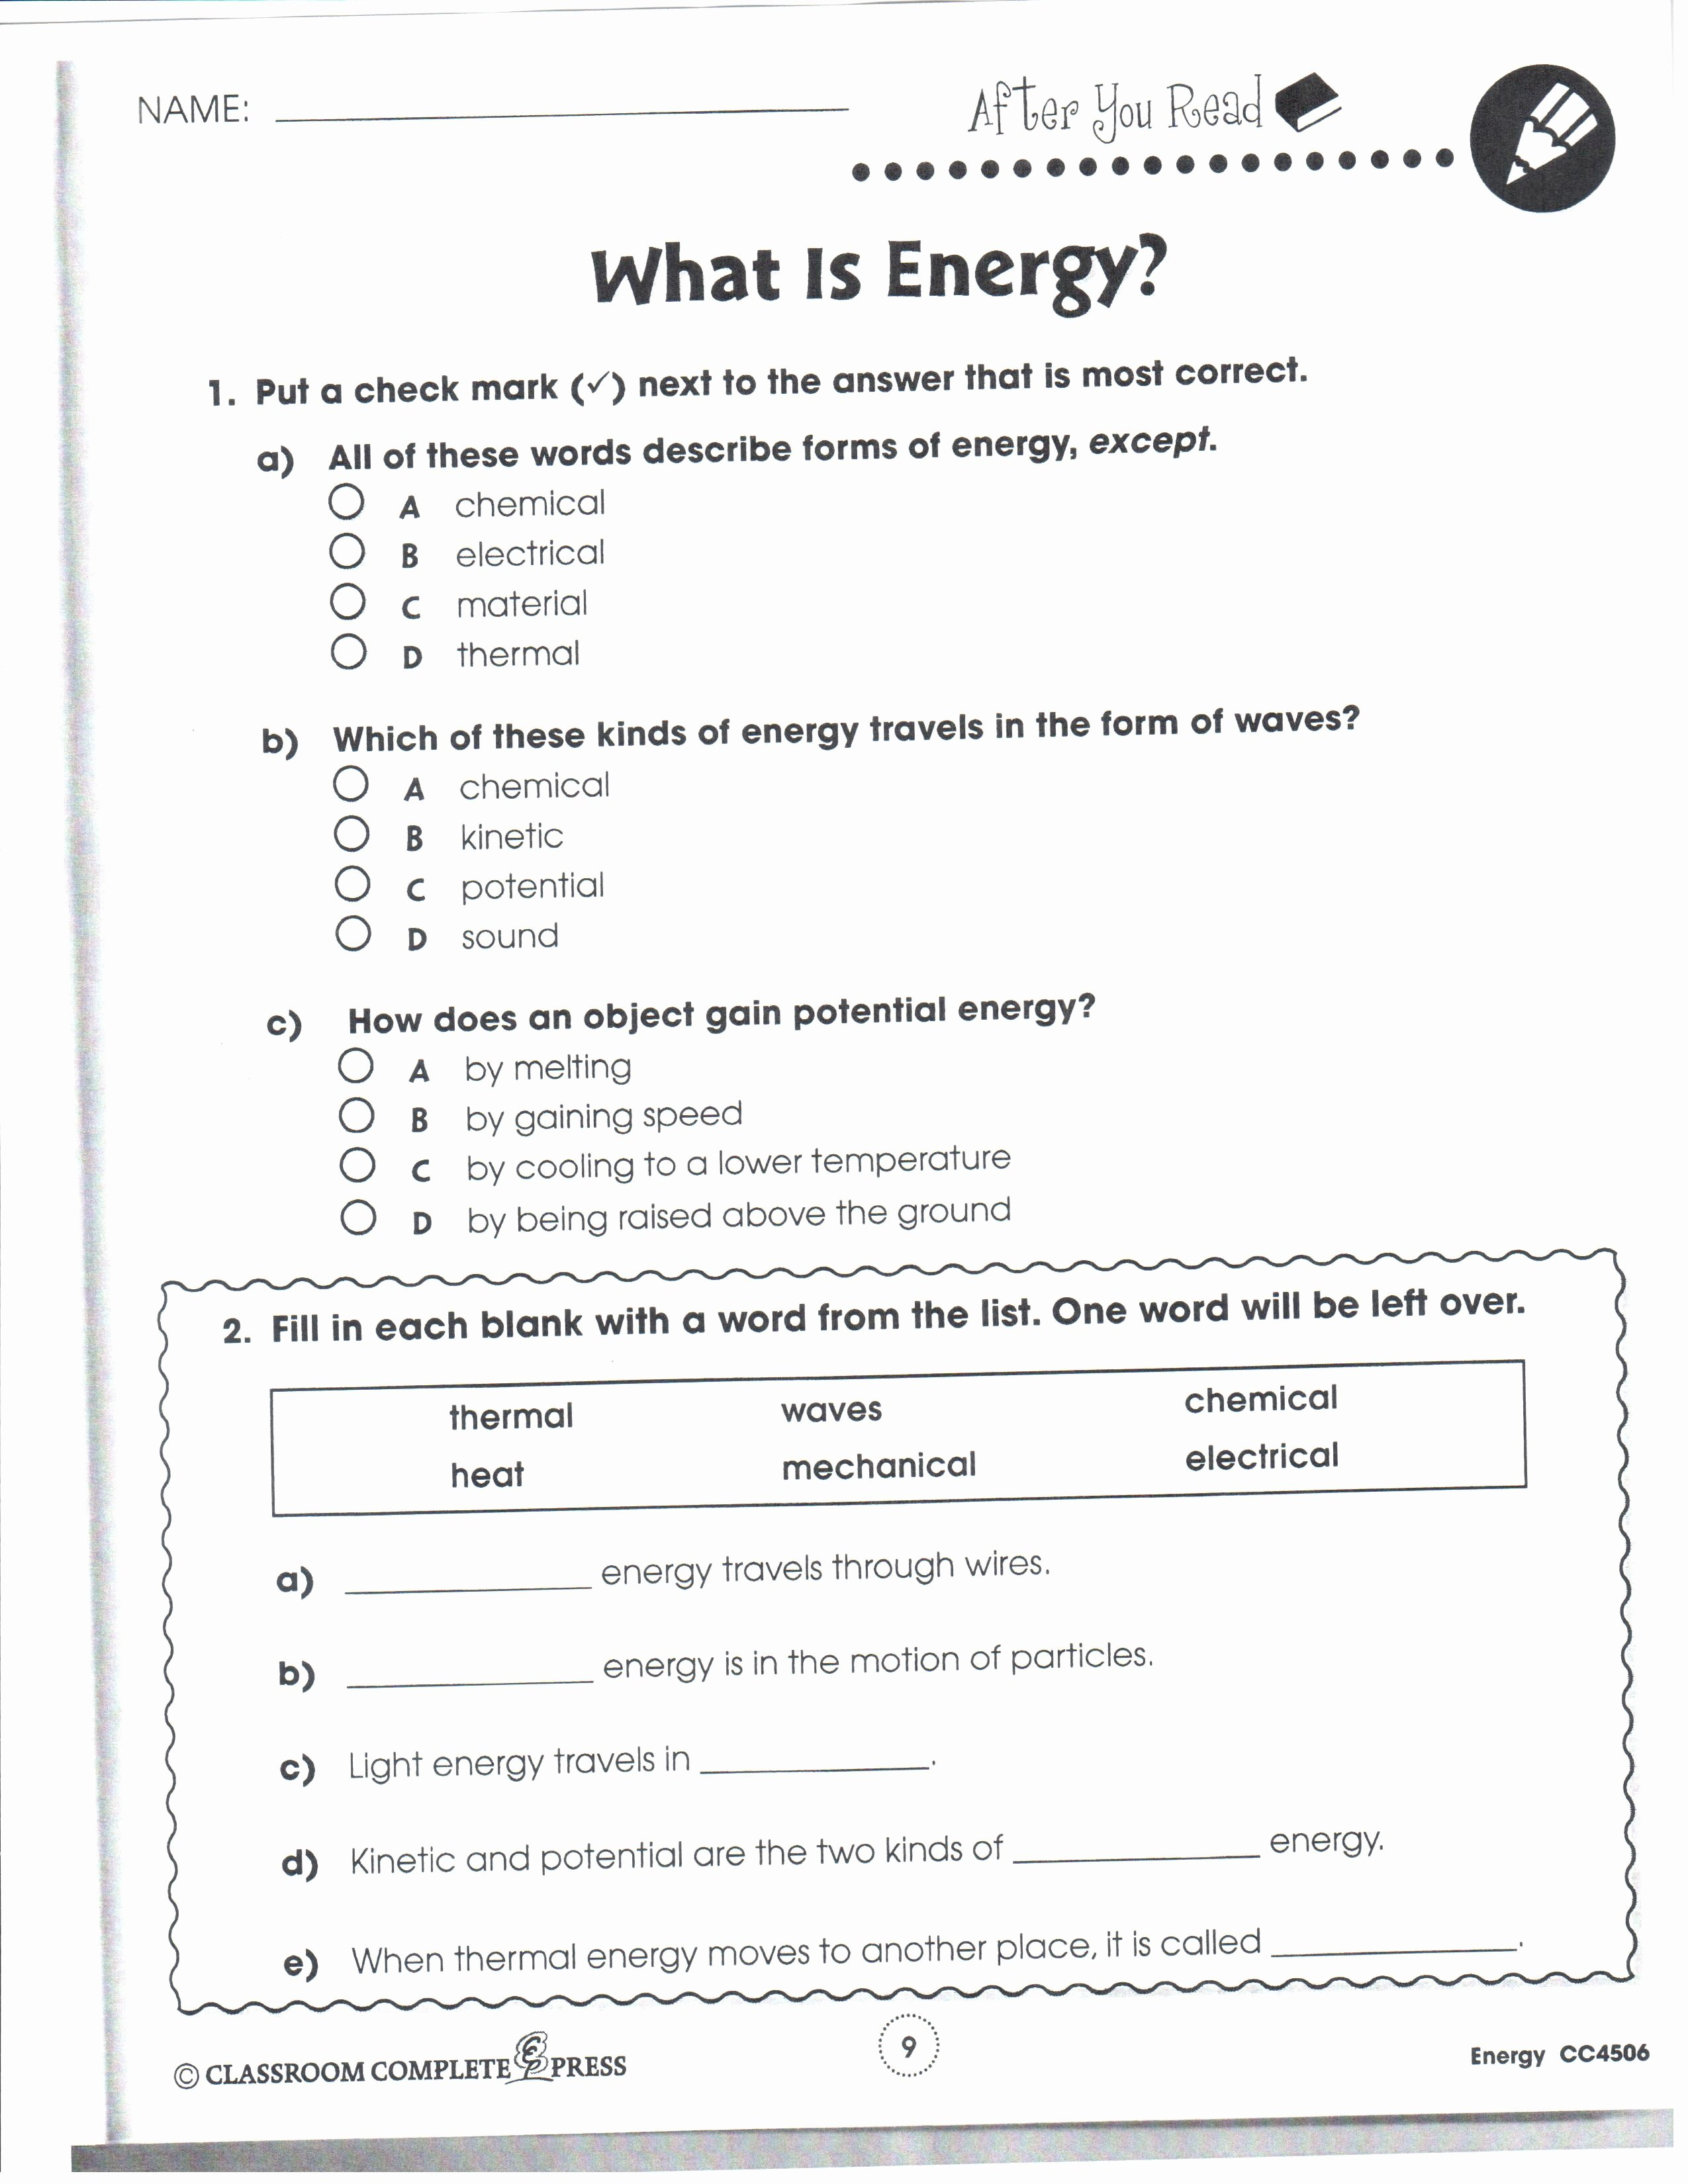 Average Balancing Word Equations Worksheet Siteraven Graphing For Solving And Graphing Inequalities Worksheet Answers